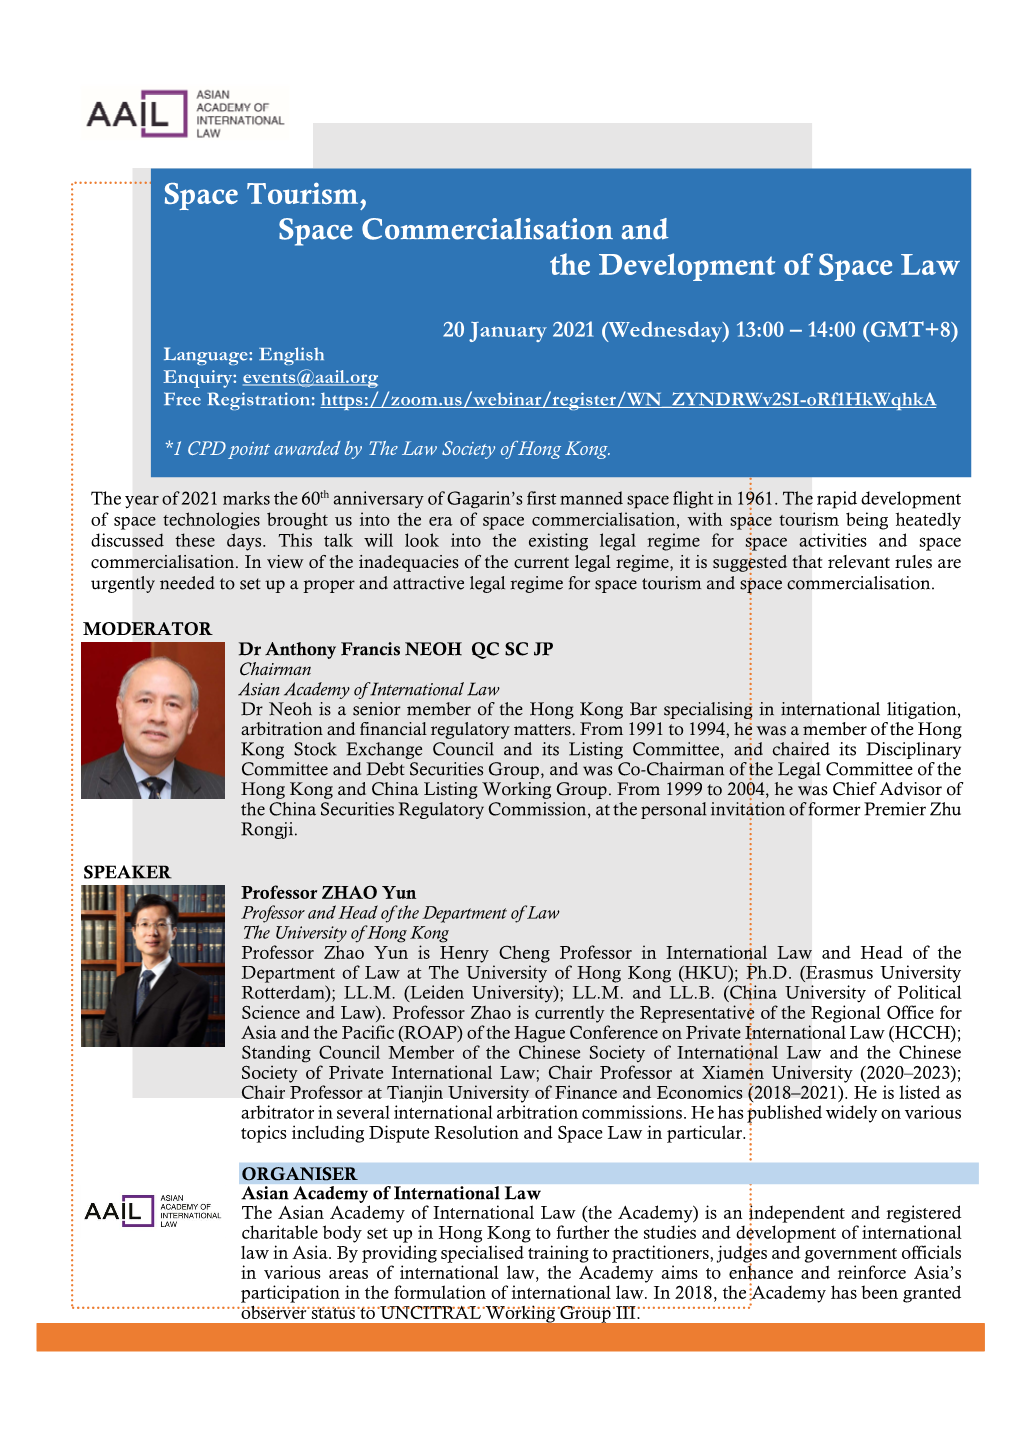 Space Tourism, Space Commercialisation and the Development of Space Law